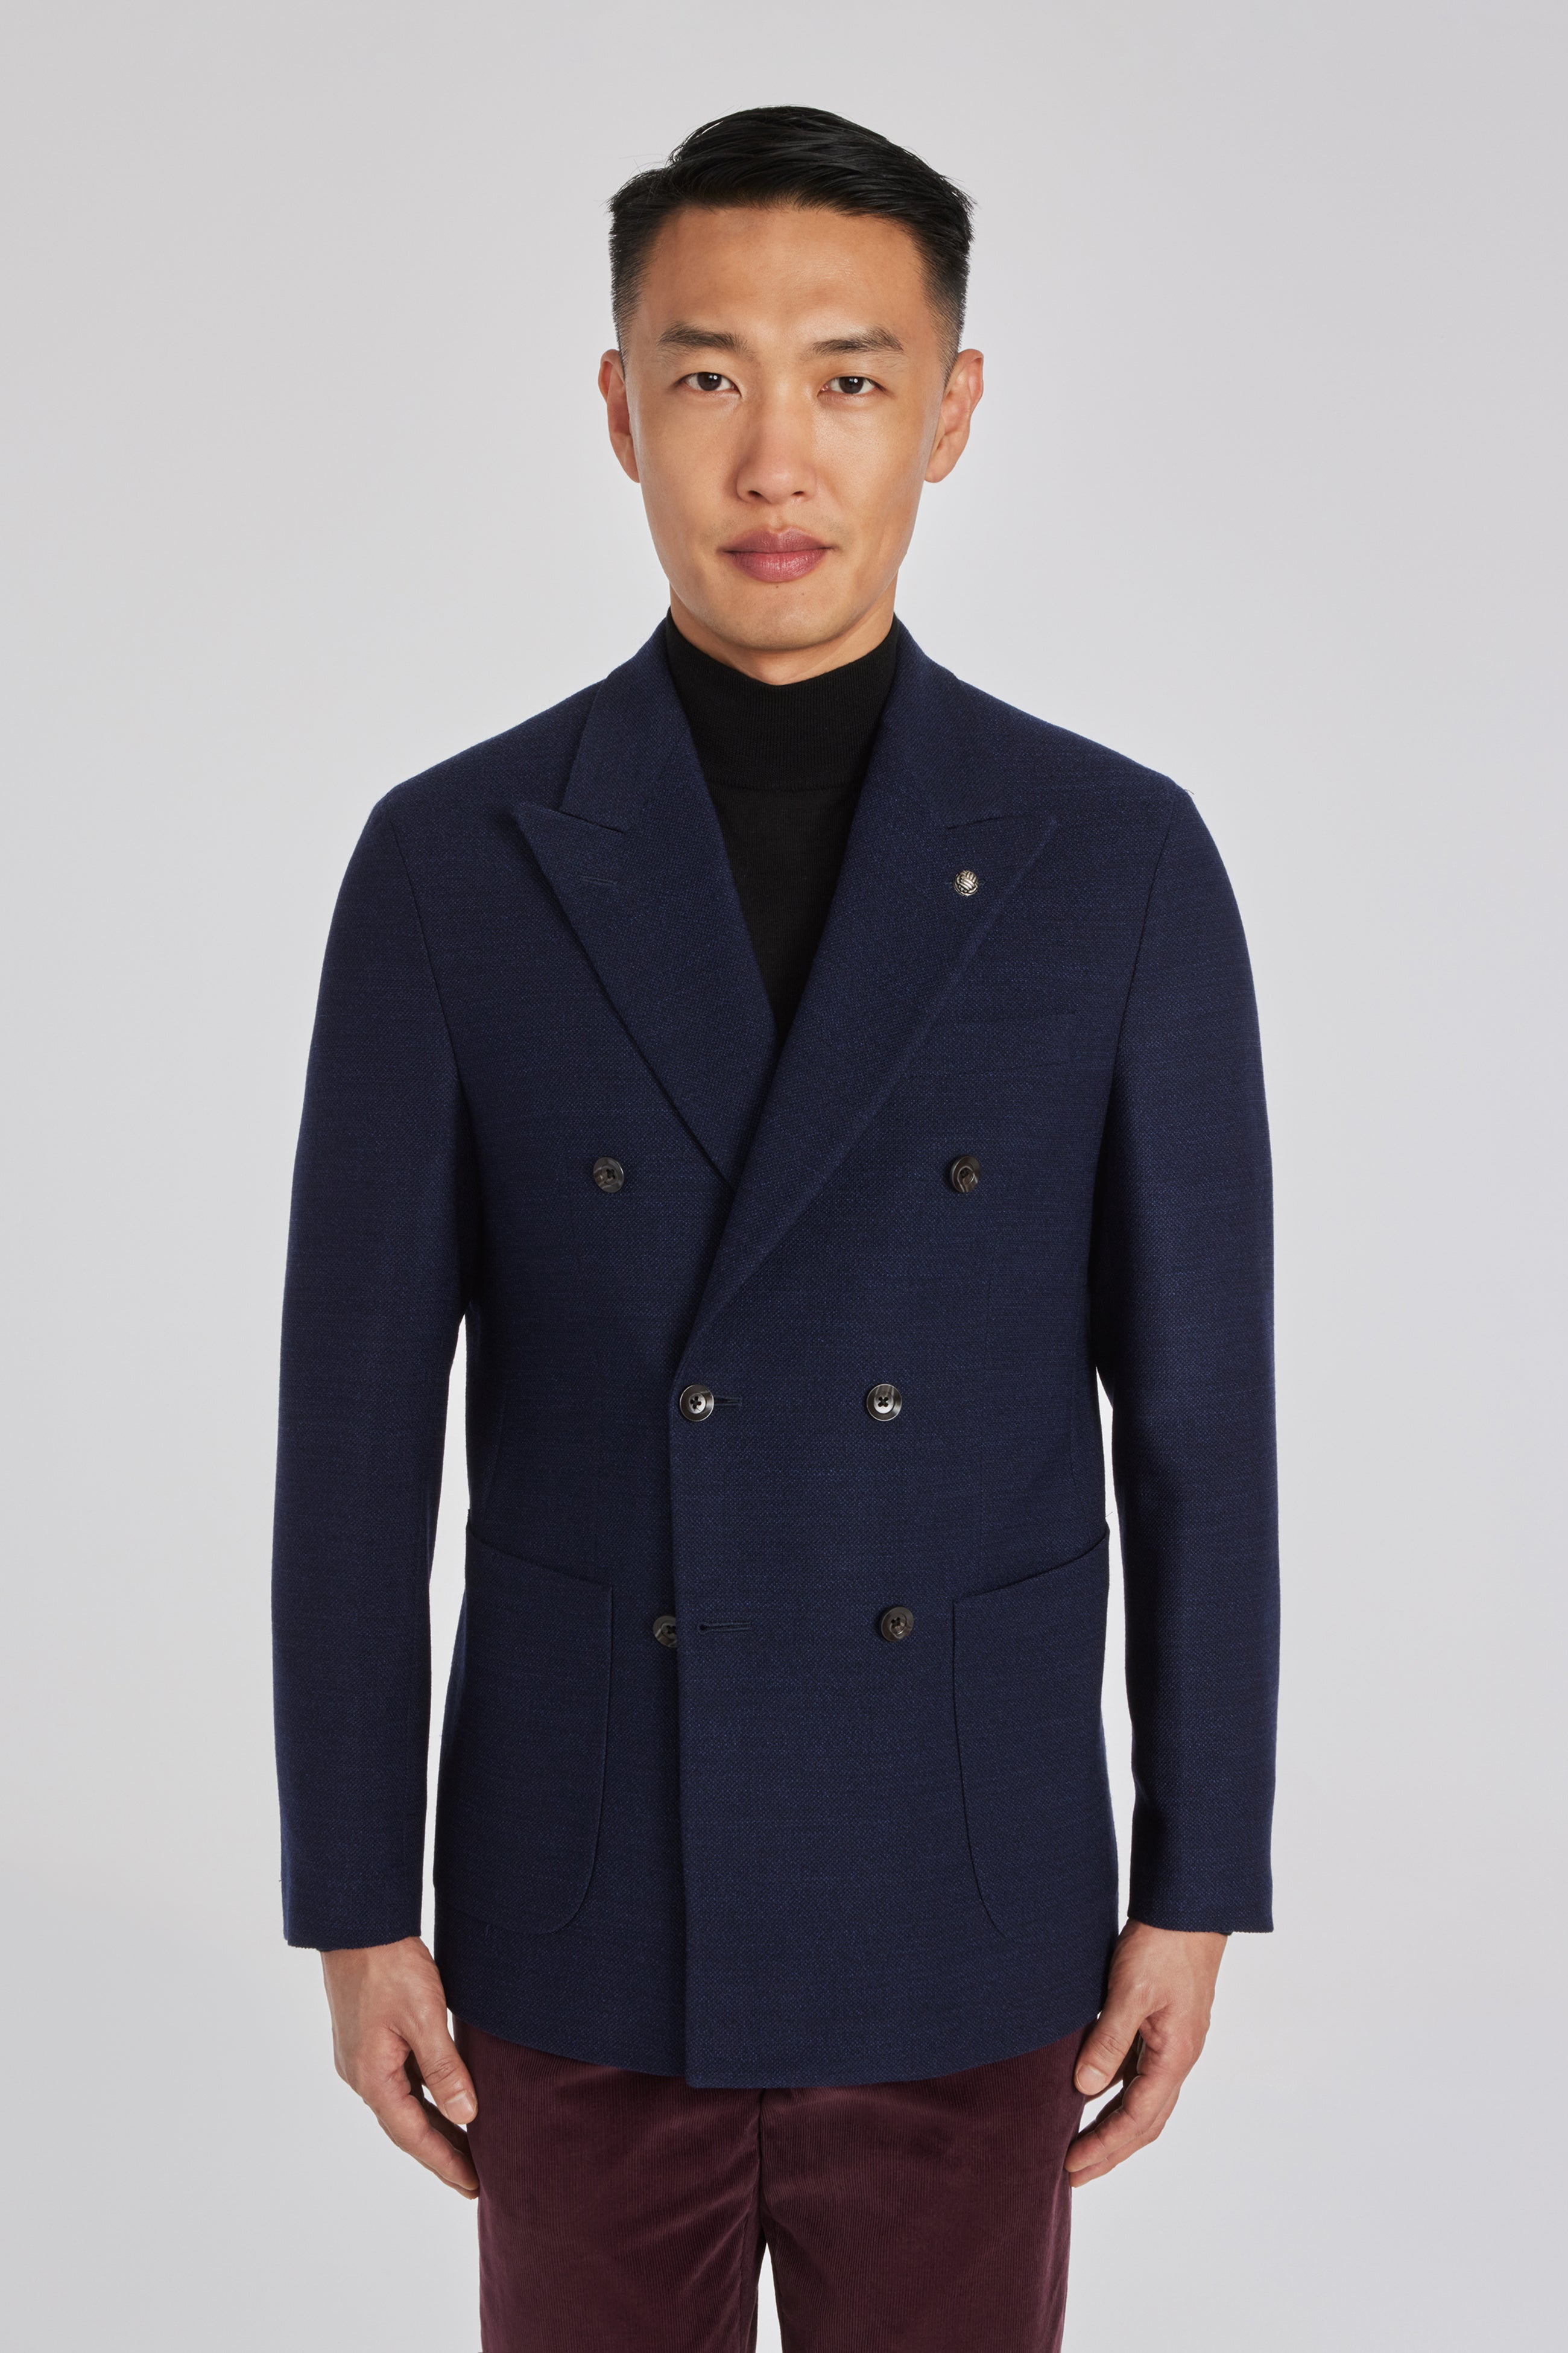 Hill Navy Solid Wool and Lycra Blazer